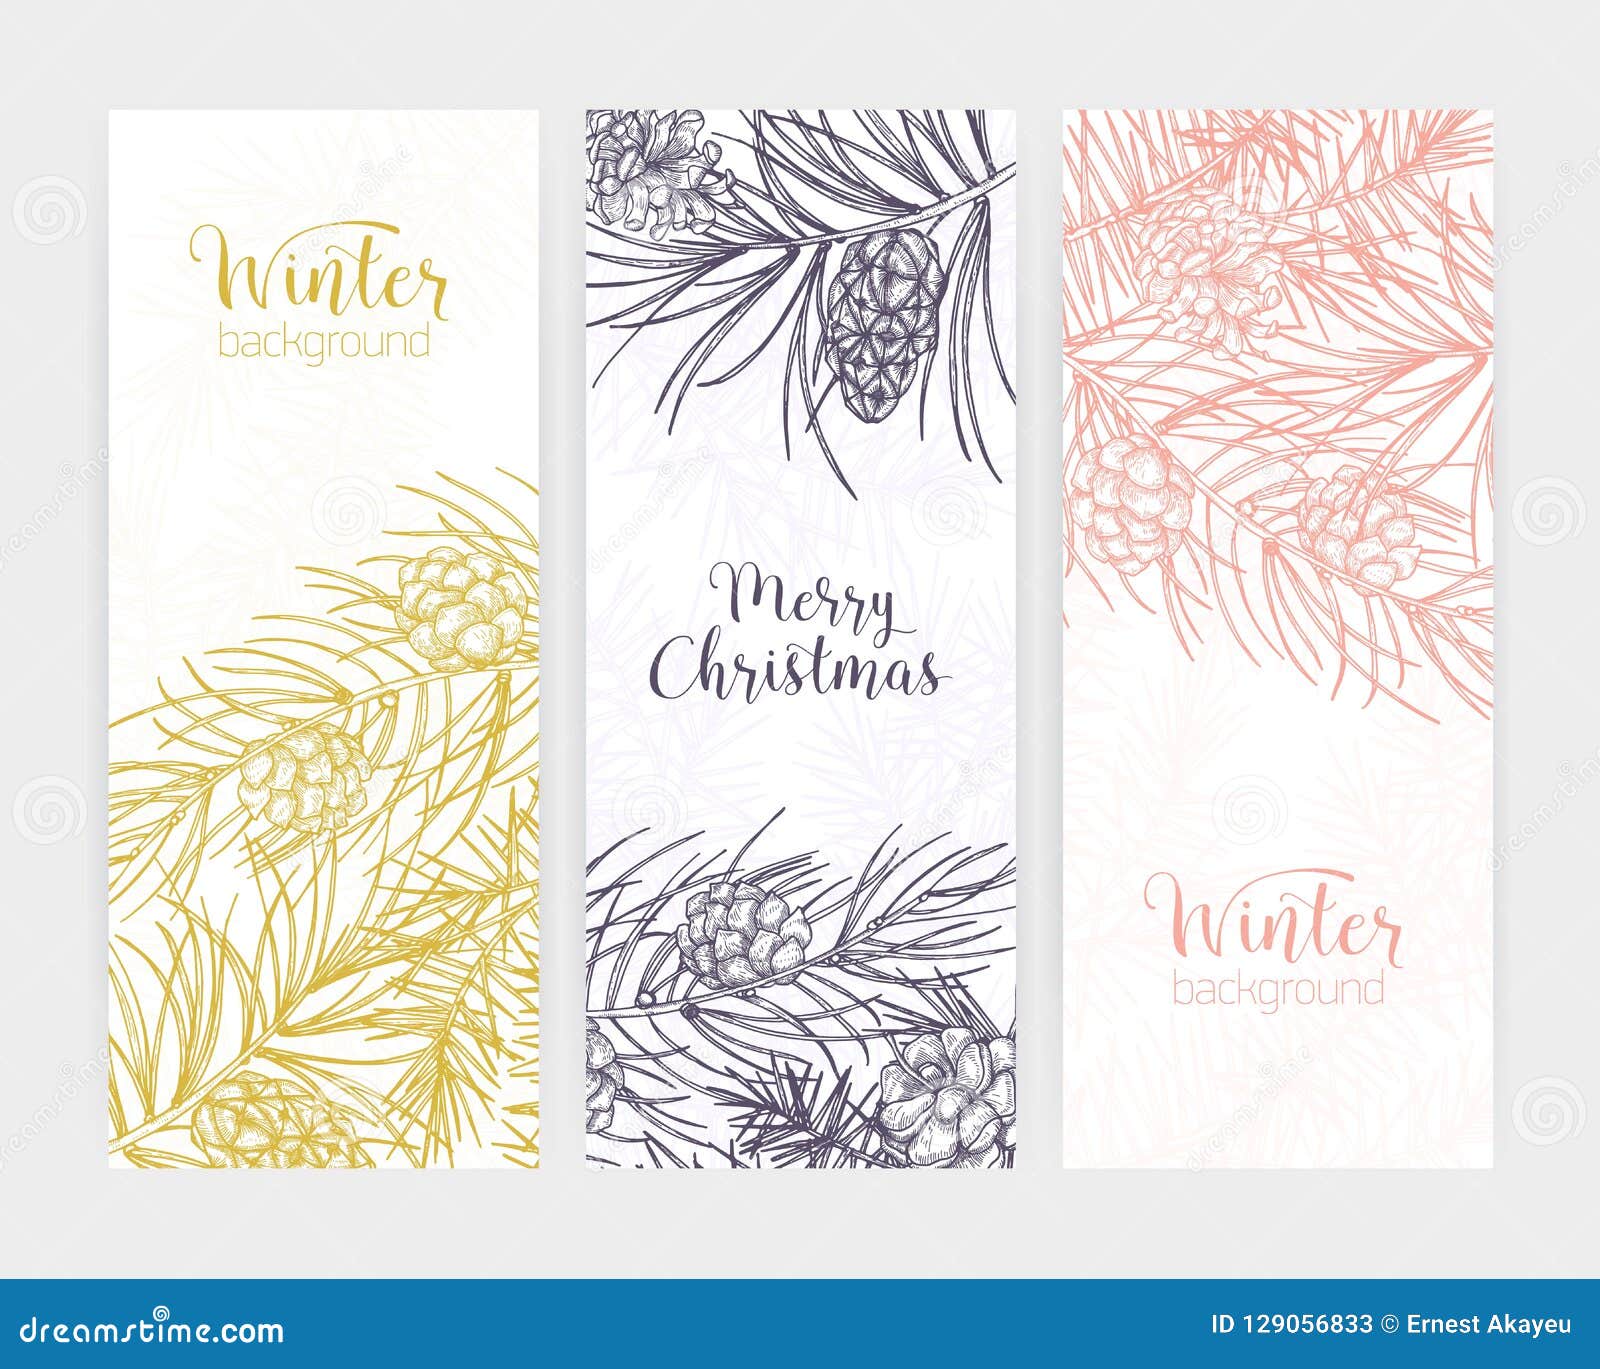 Bundle Of Vertical Seasonal Banners Or Backdrops With Pine Tree